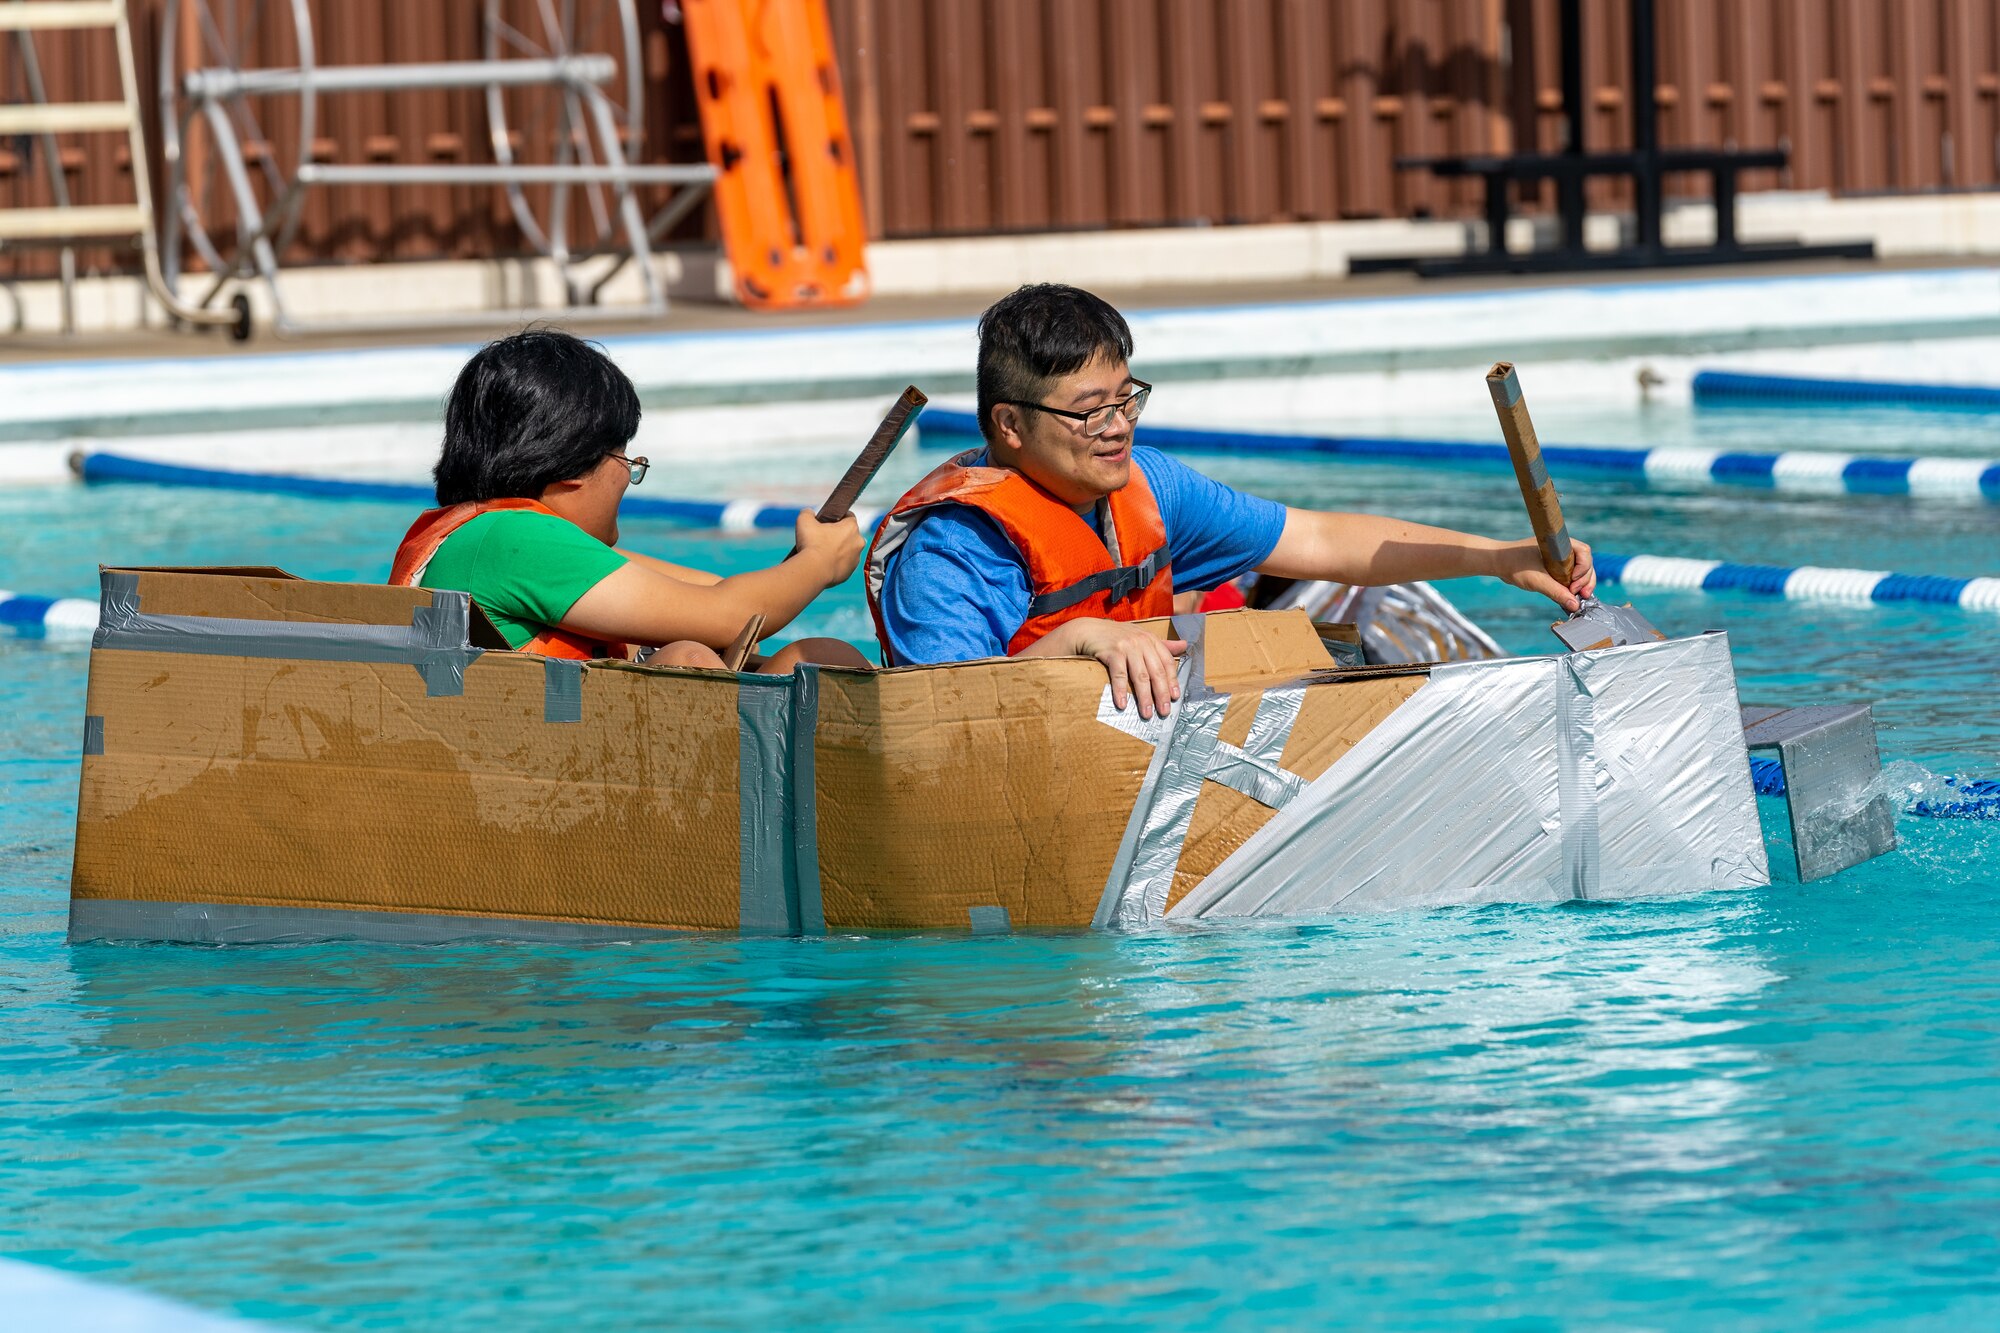 U.S. Navy Chief Funsing Cool, Ingalls Shipbuilding supervisor of shipbuilding, and Matthew Cool paddle their boat during the Cardboard Regatta at Keesler Air Force Base, Mississippi, July 15, 2023.